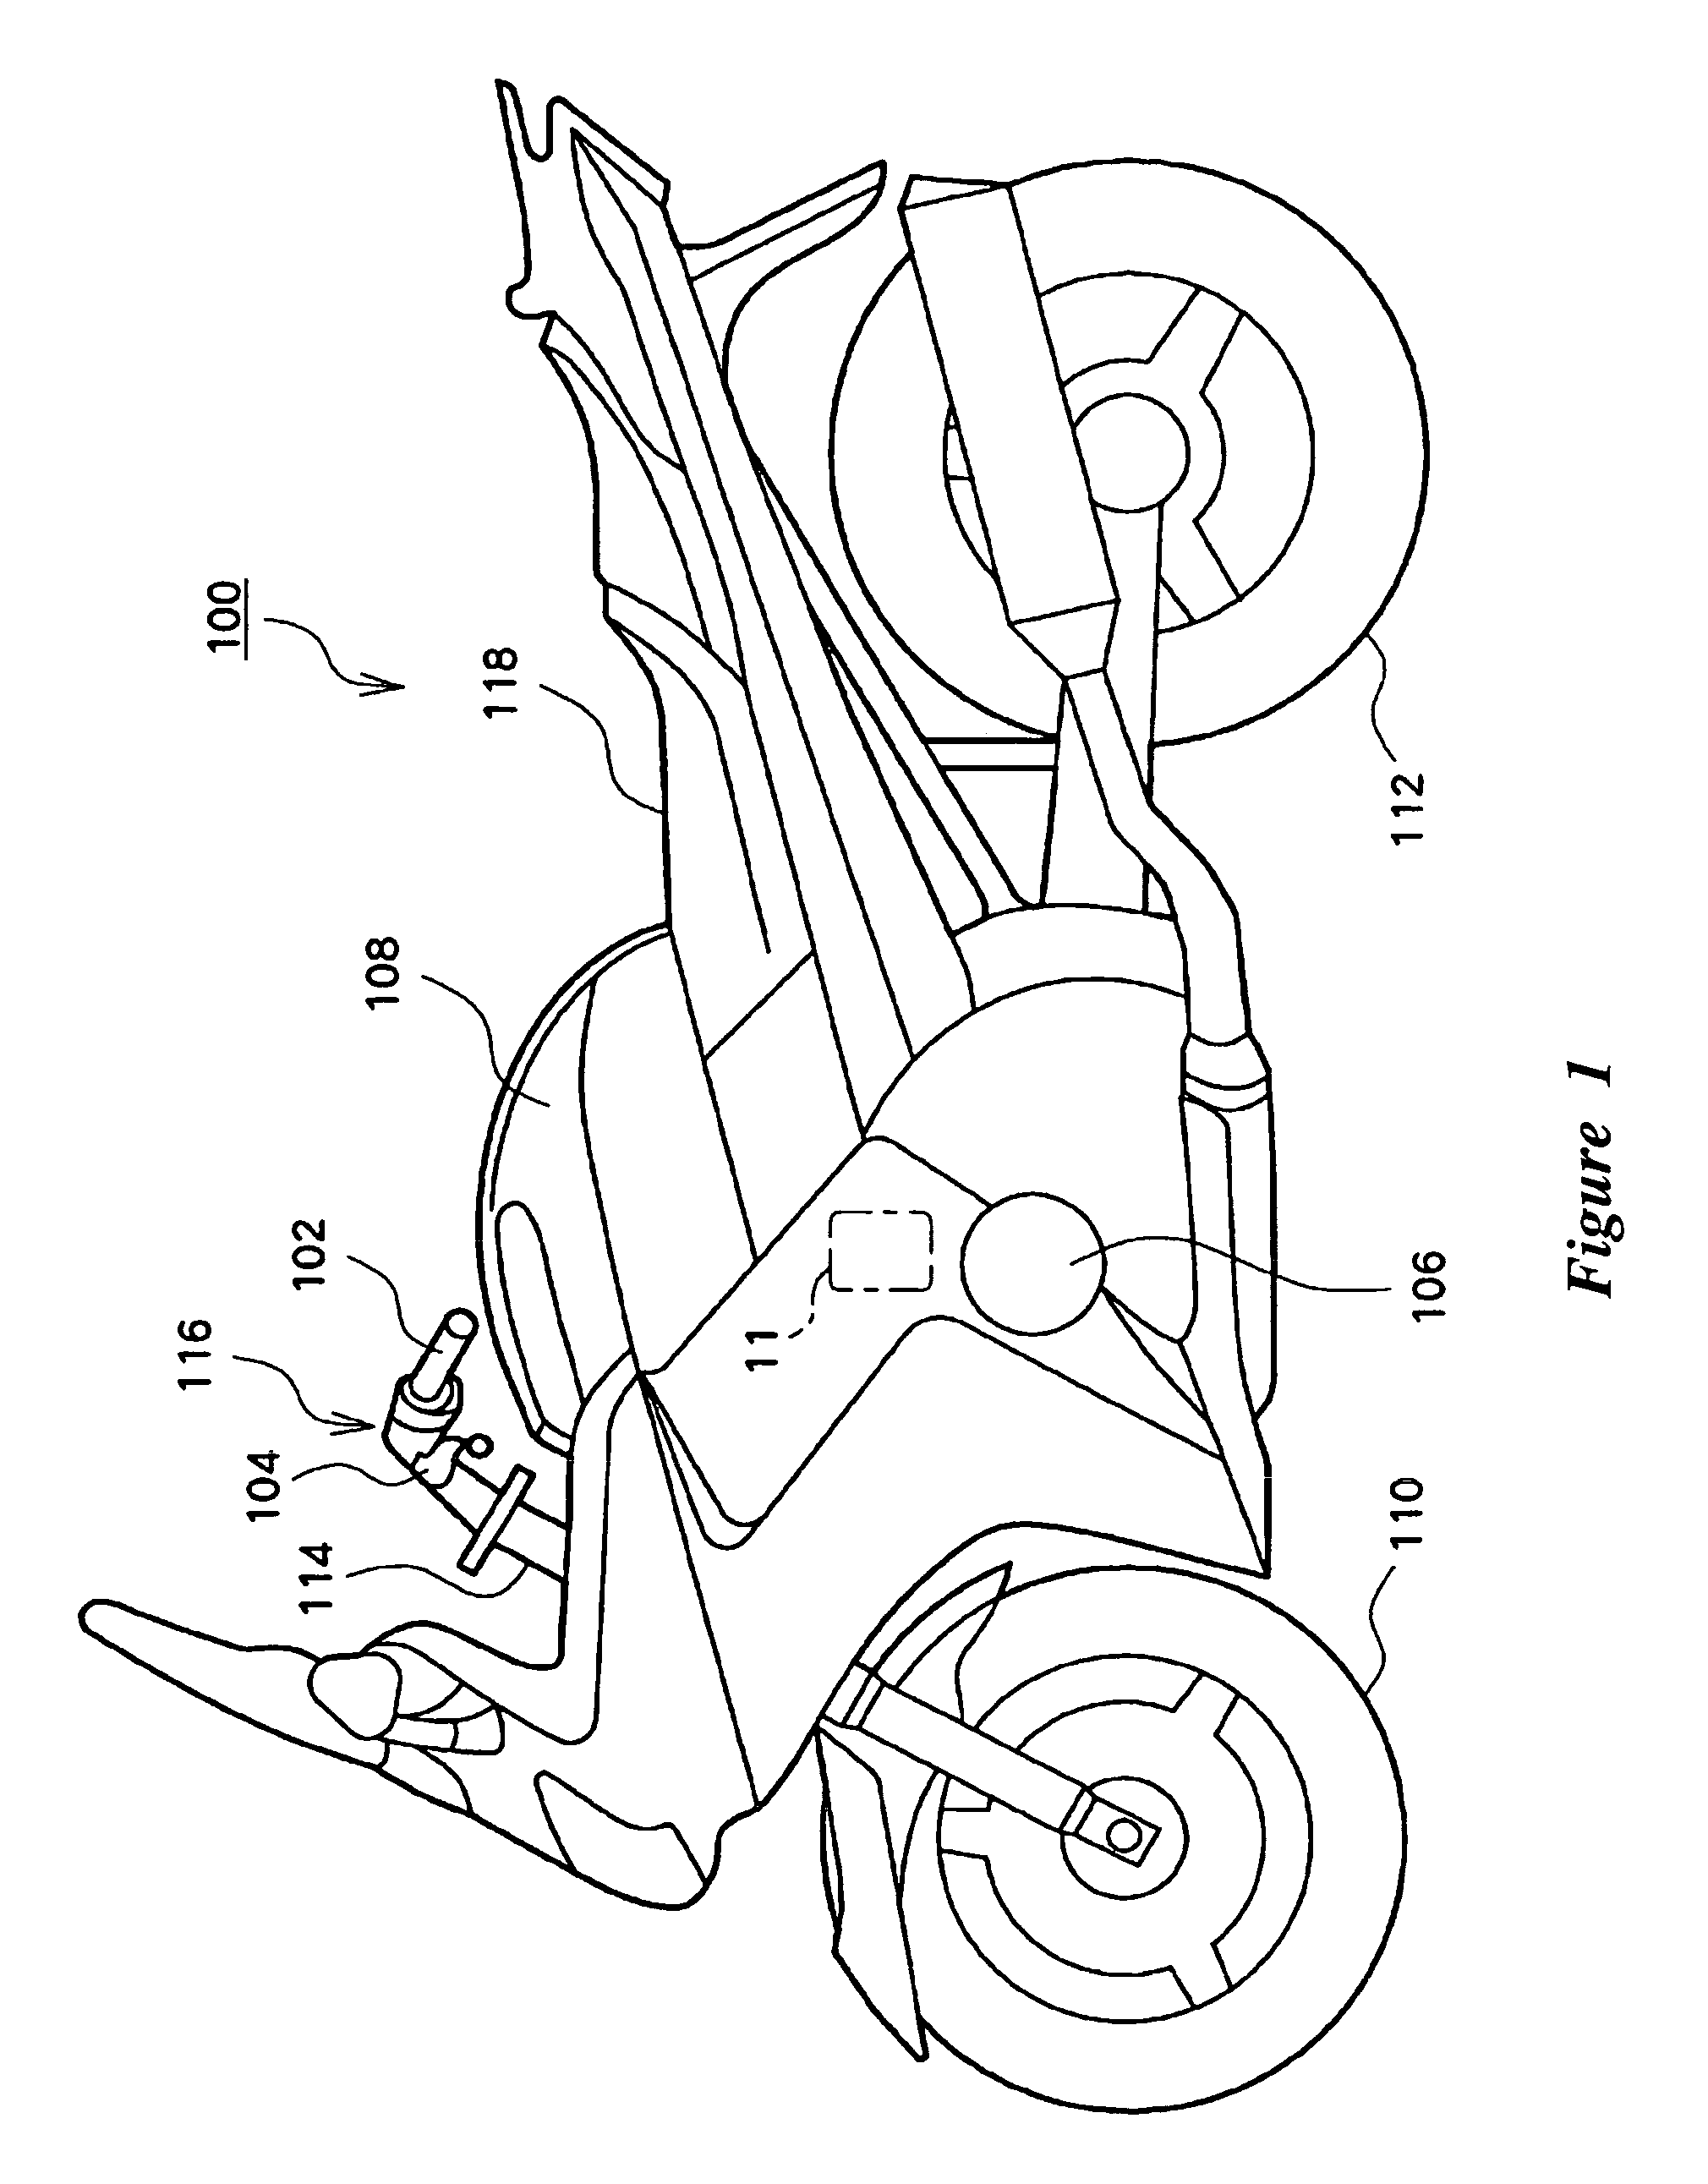 Clutch actuator for straddle-type vehicle